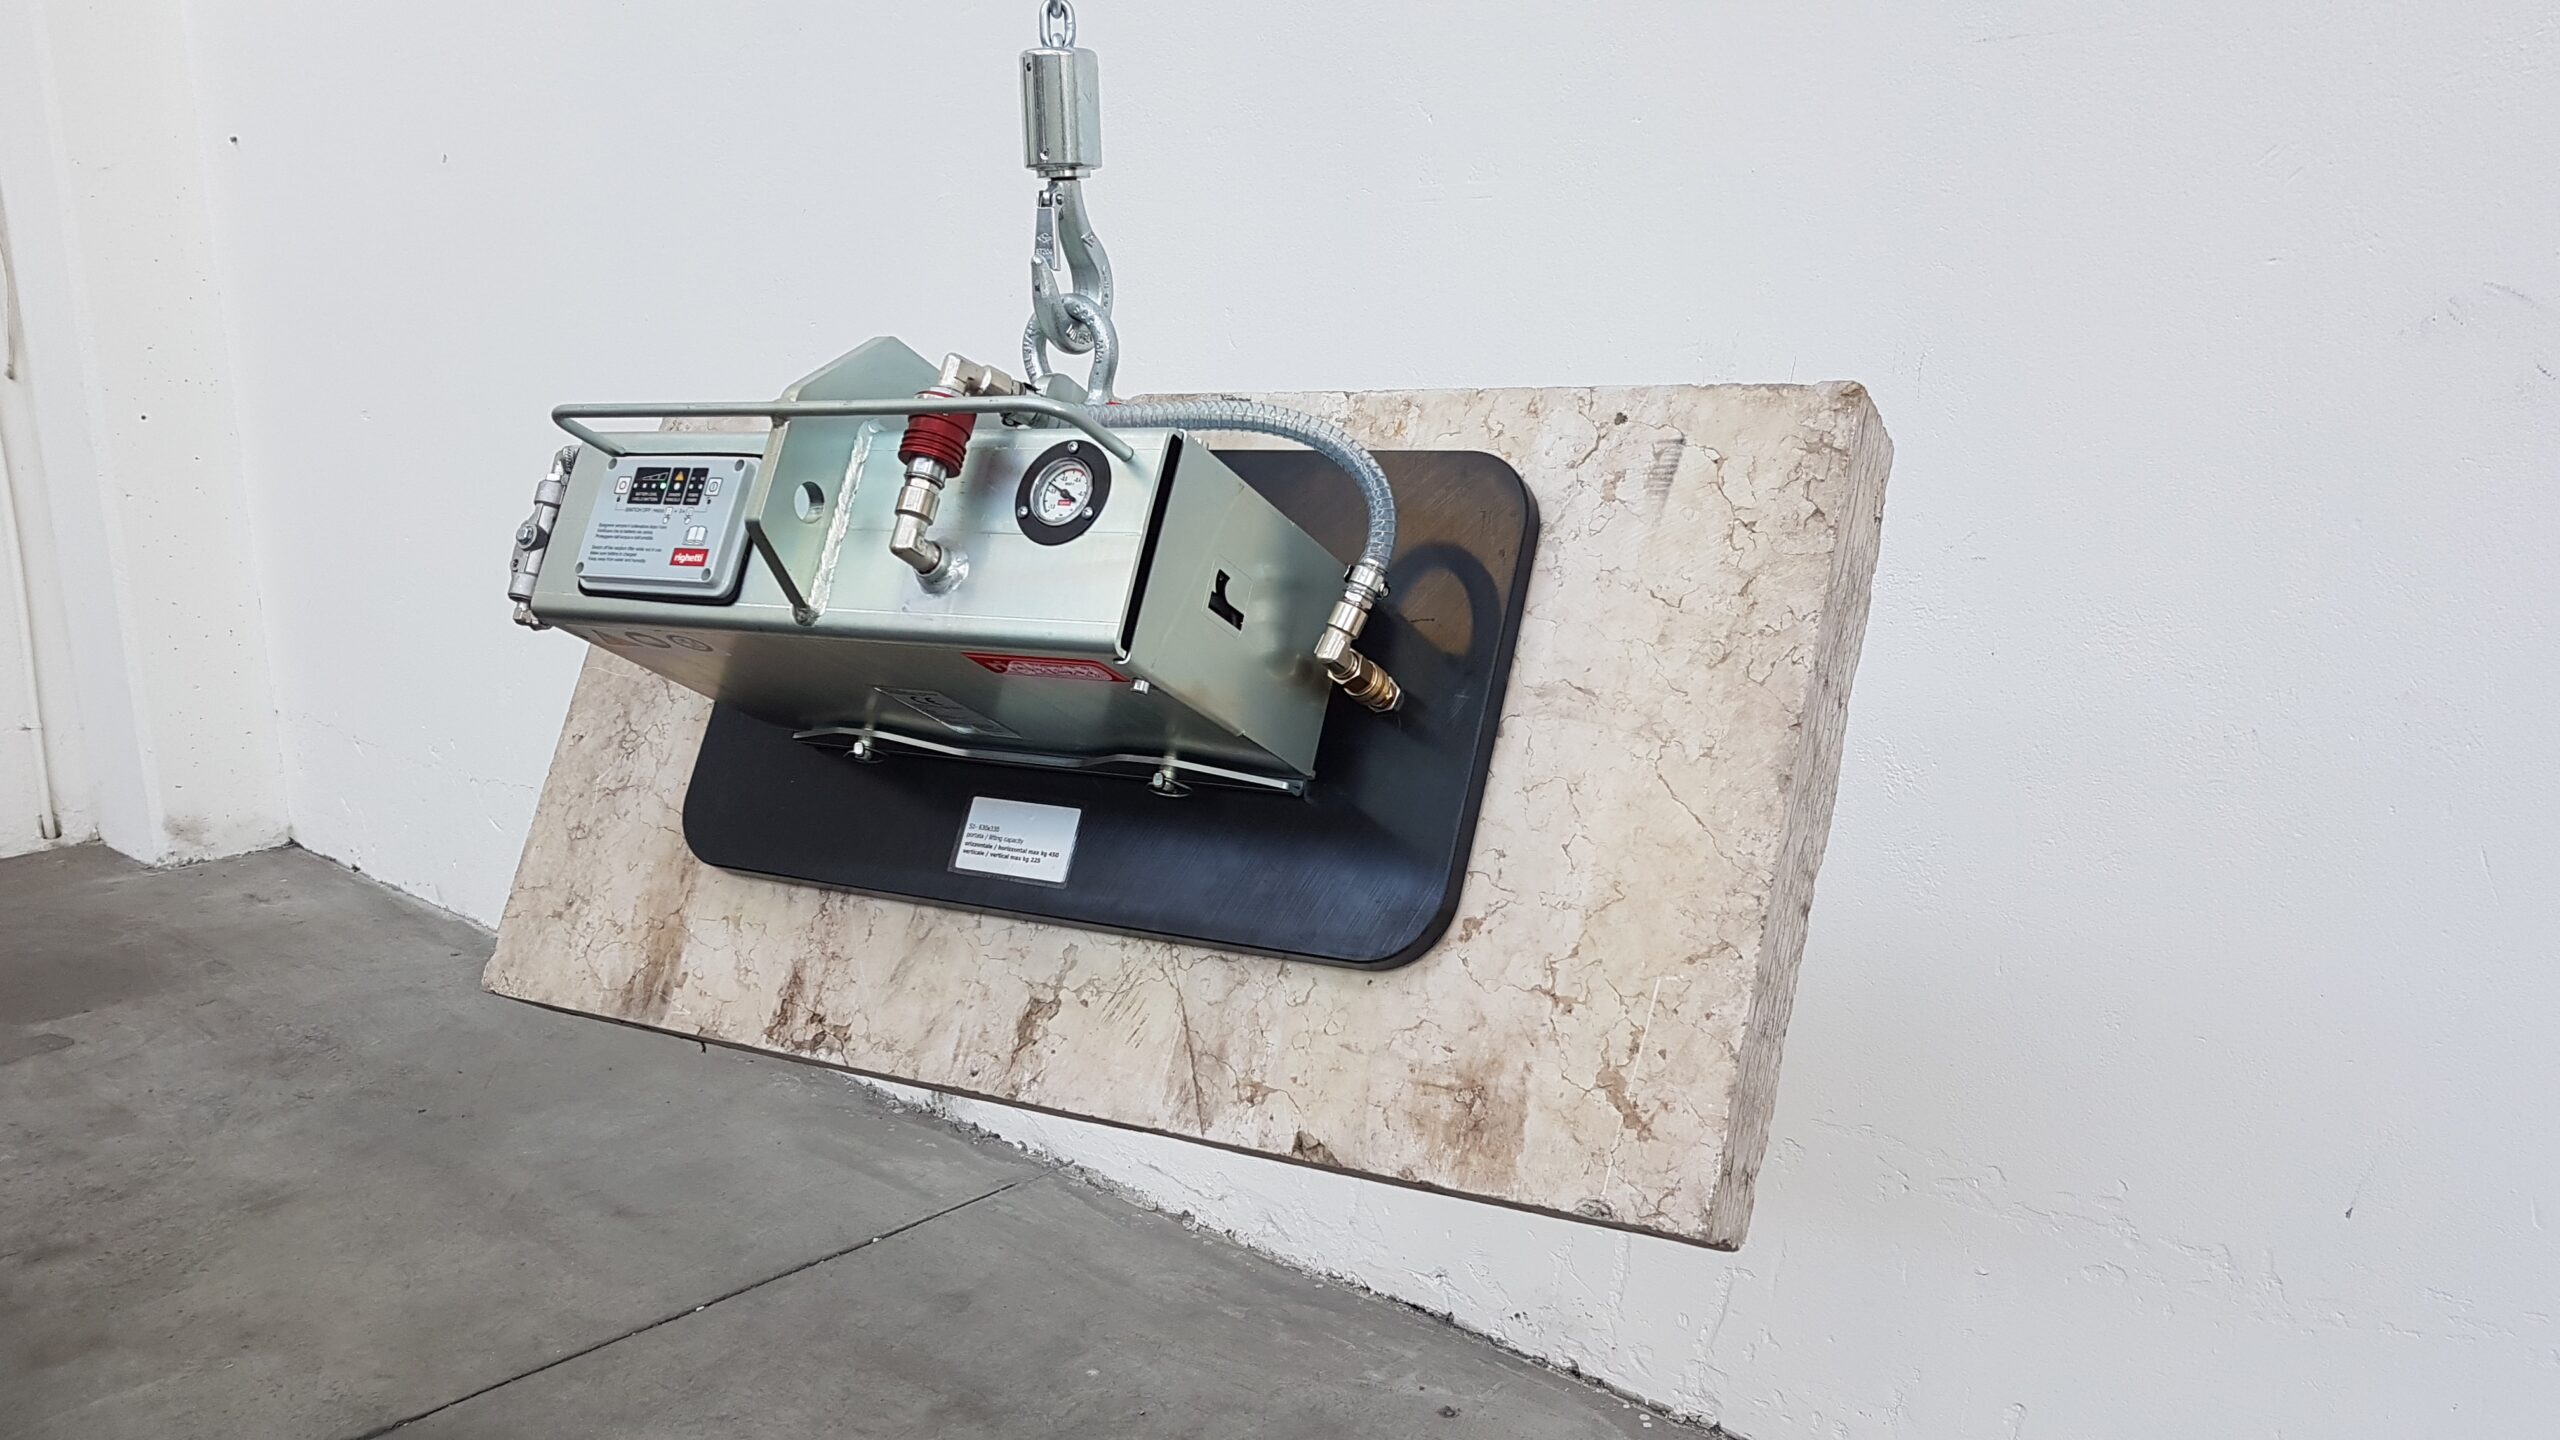 Autonomous Vacuum Lifter for laying stones powerd by a battery system